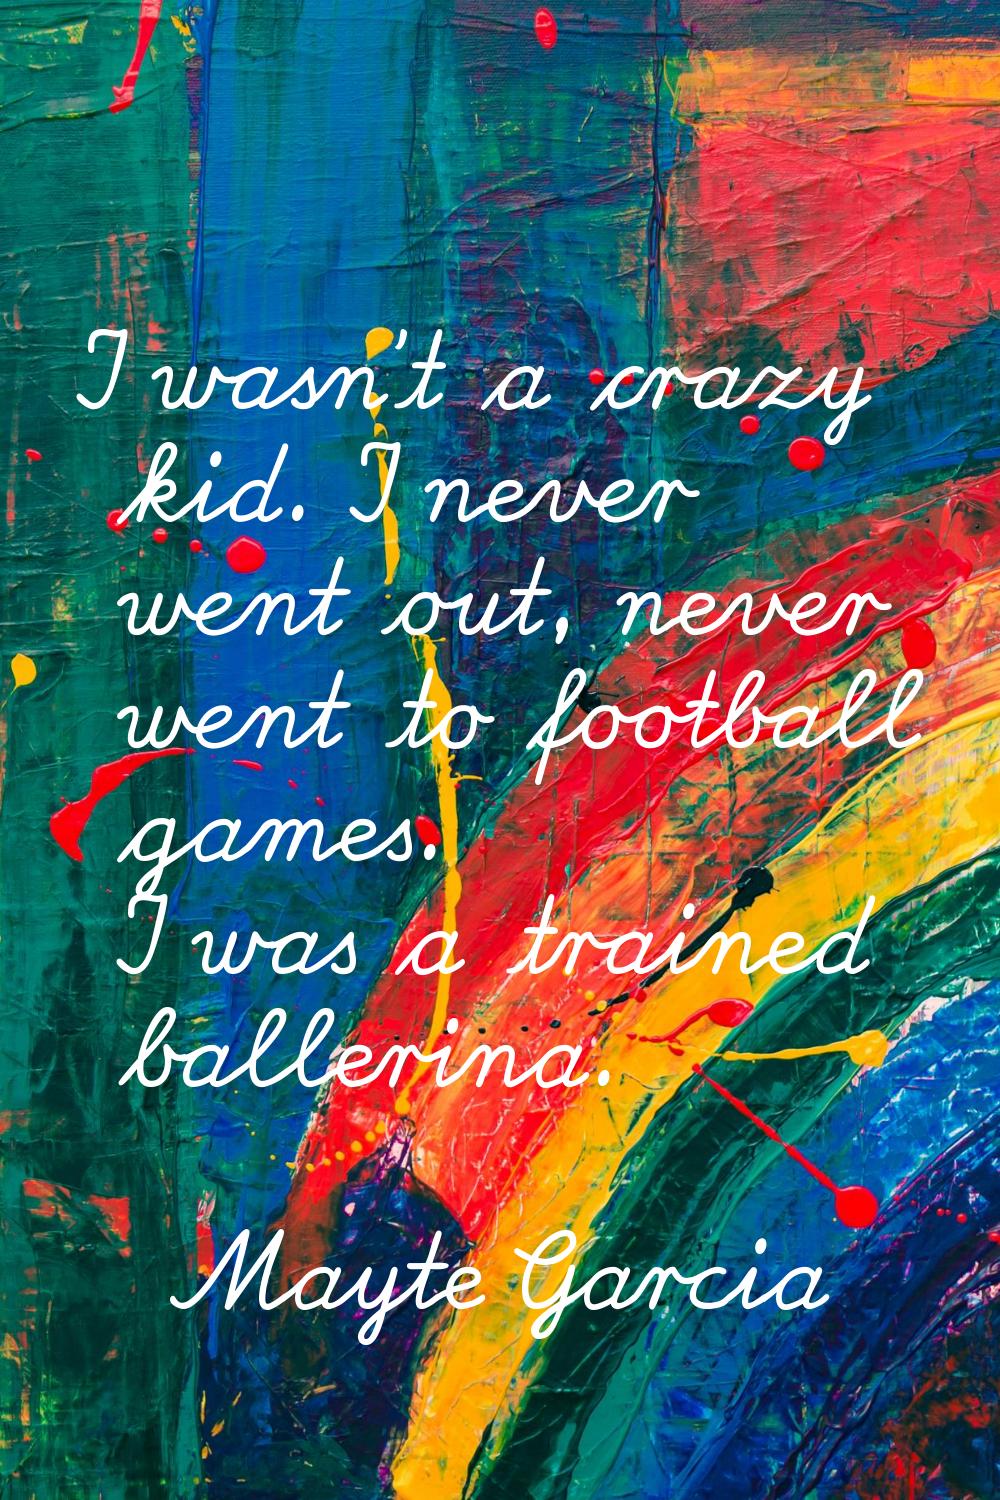 I wasn't a crazy kid. I never went out, never went to football games. I was a trained ballerina.